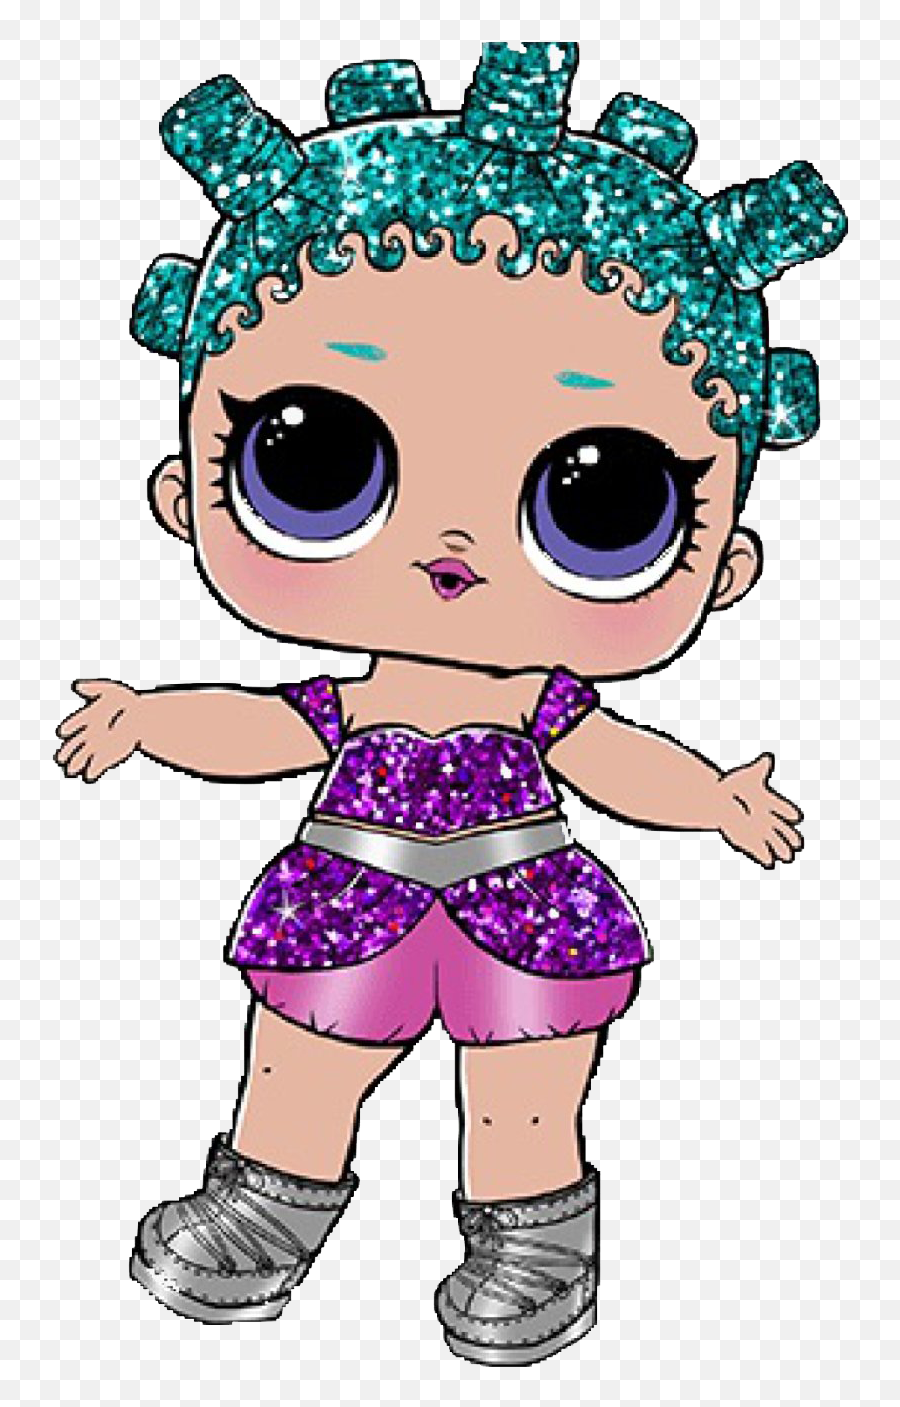 Lol Doll Png Transparent Picture - Cosmic Queen Lol Surprise,Lol Dolls Png